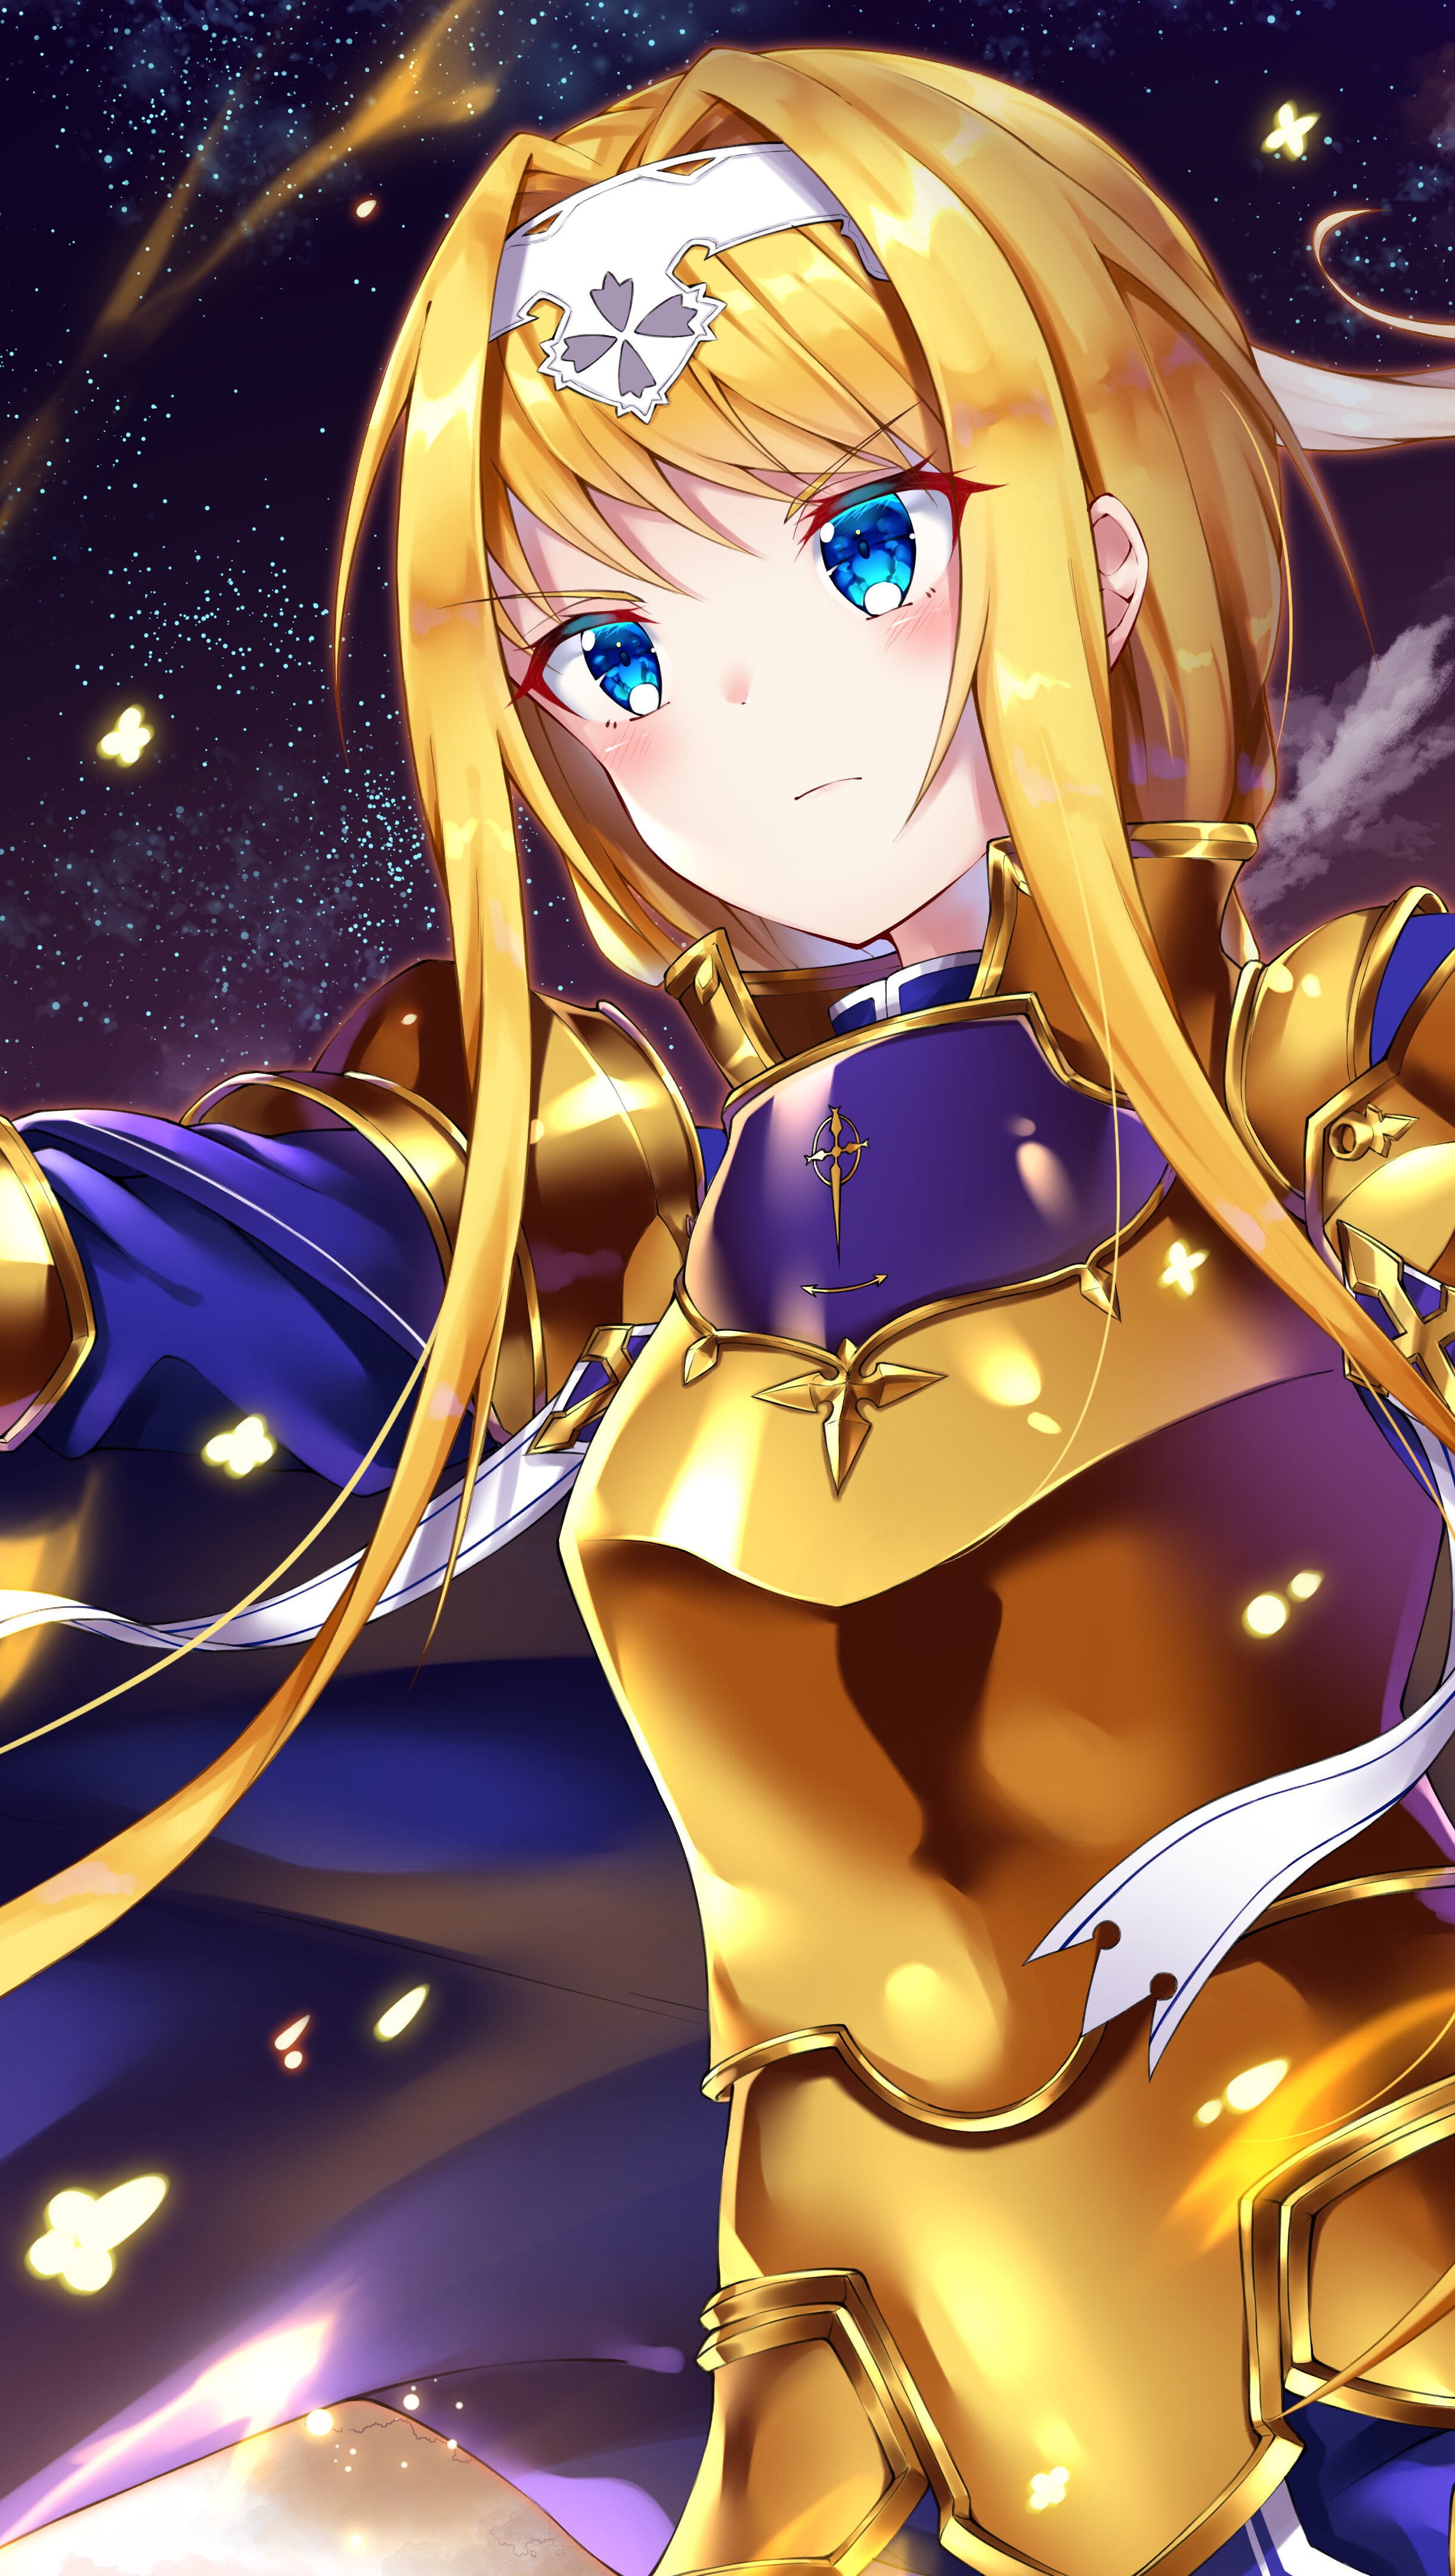 Anime Wallpaper Alice Sao with sword from Alicization Vertical